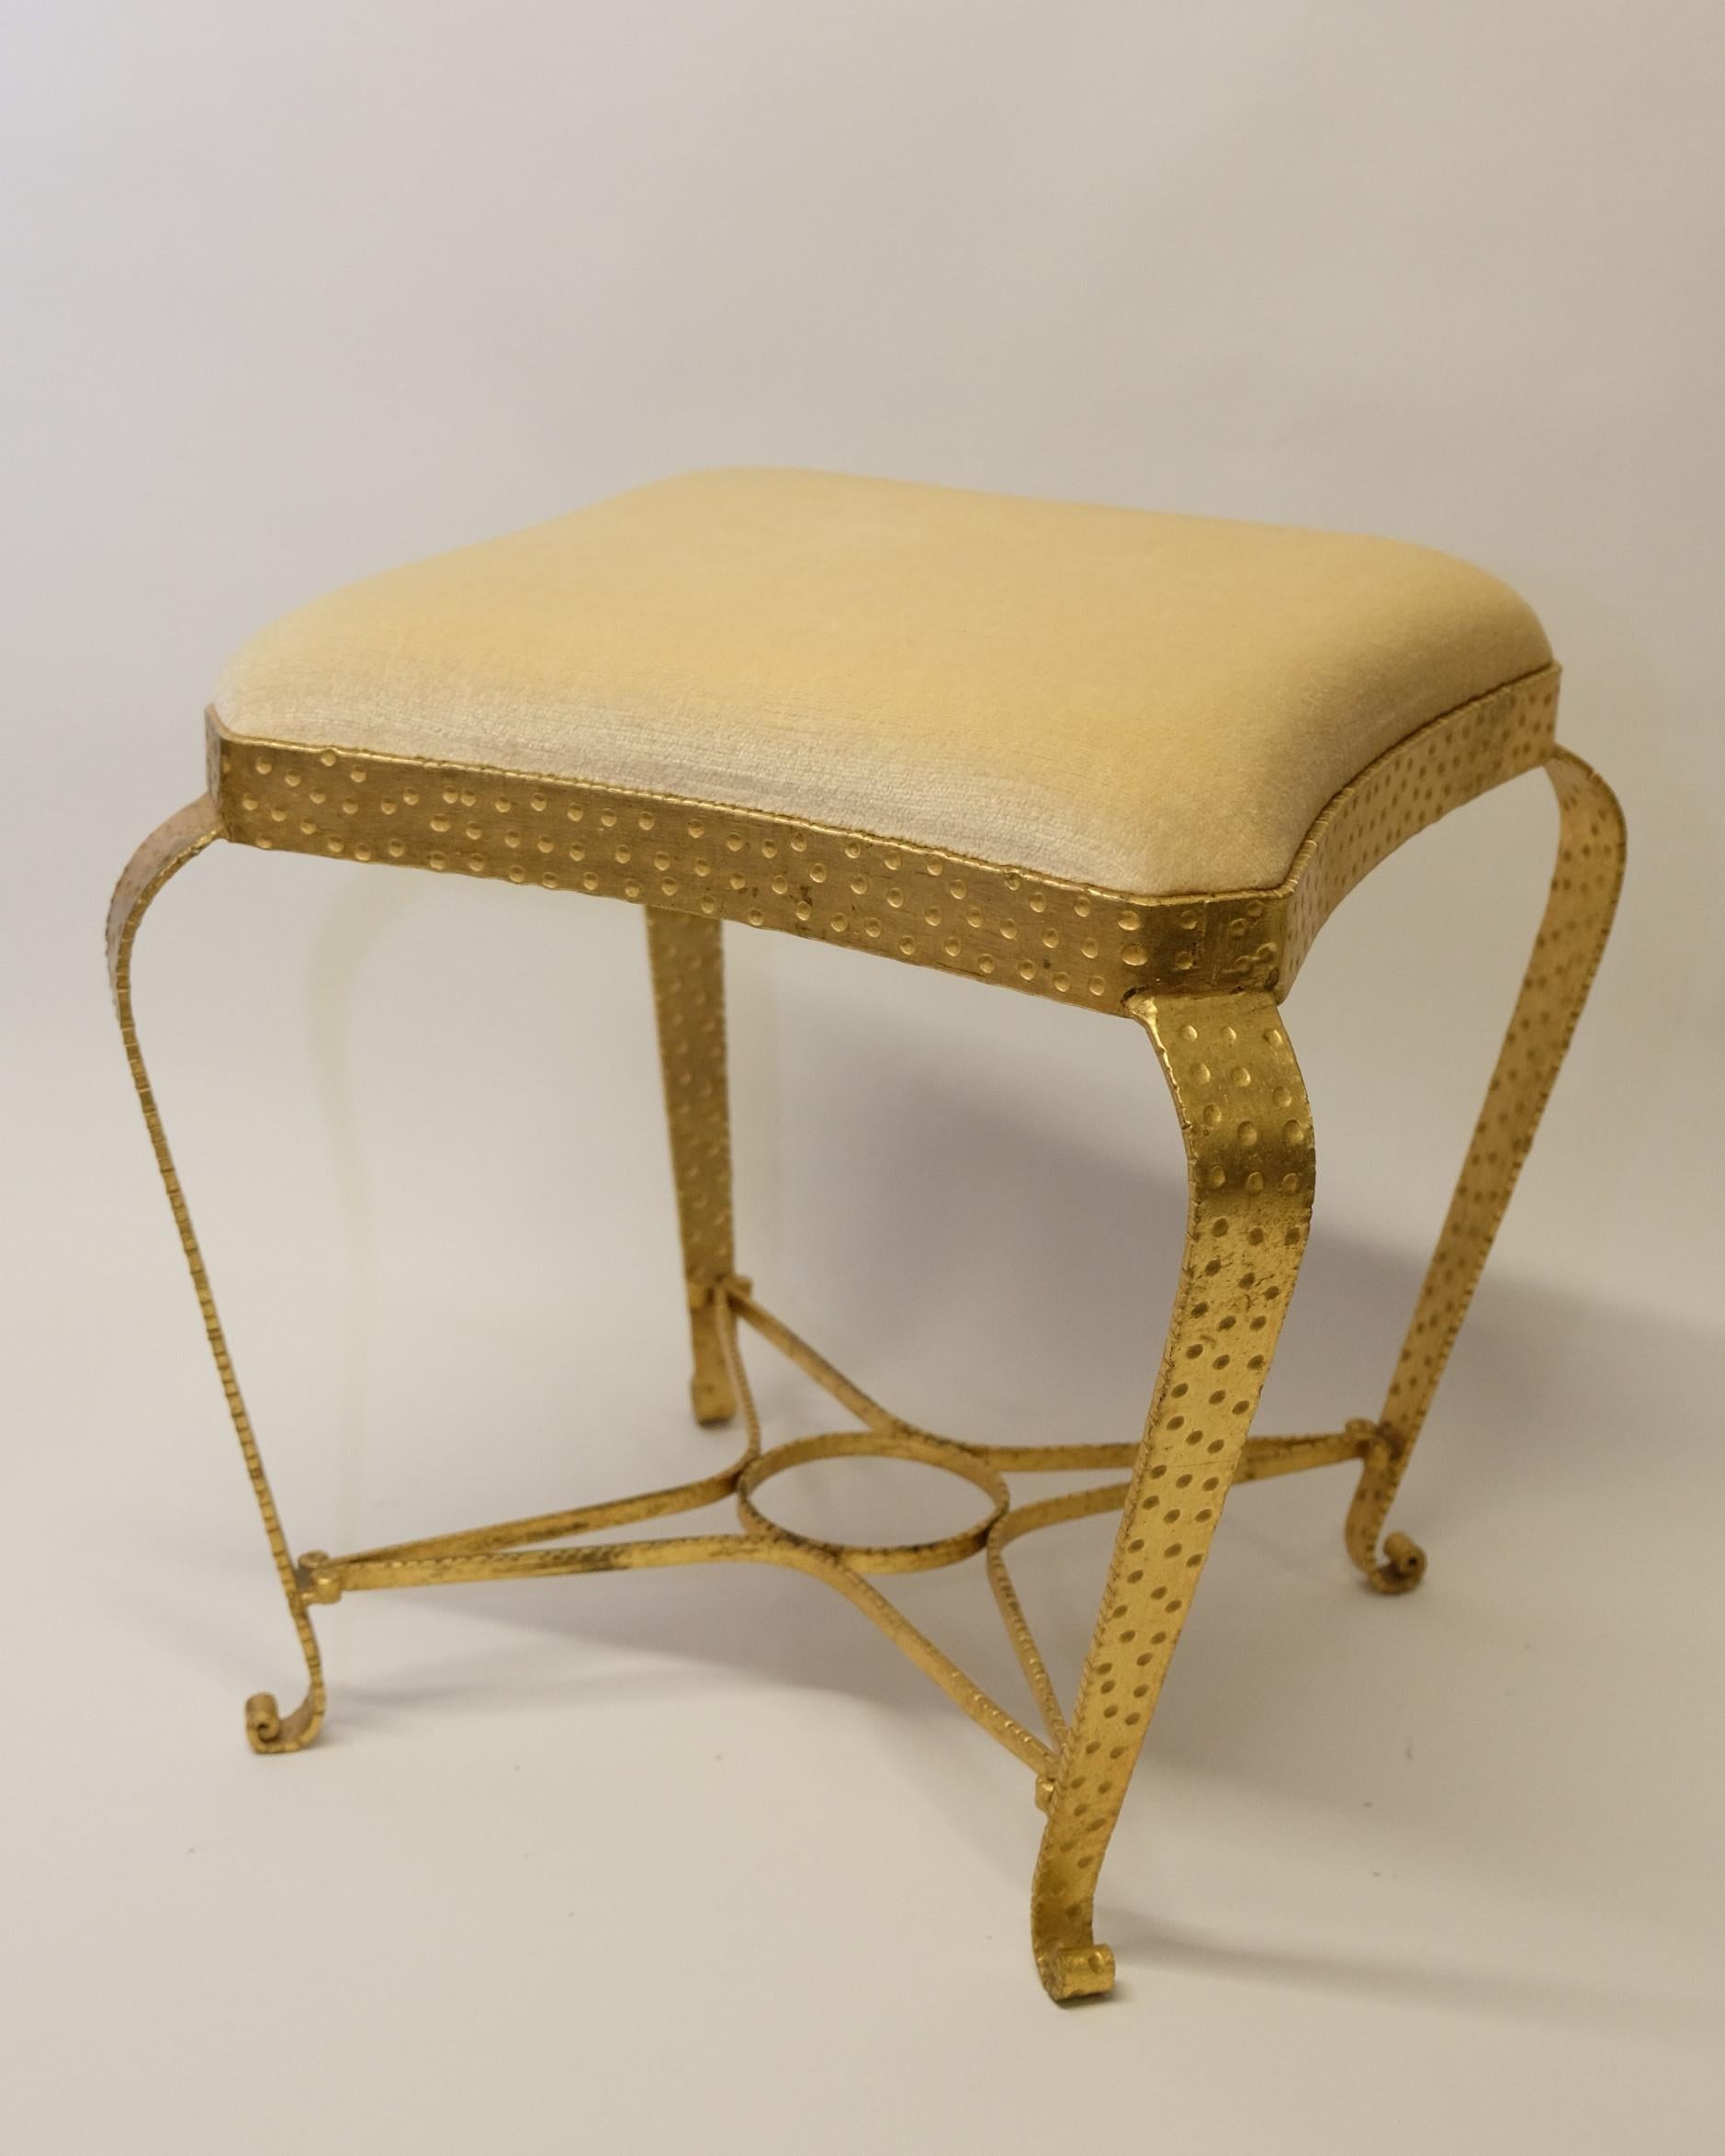 Hammered Stool in Gilt Metal by Pier Luigi Colli, Italy 1950s For Sale